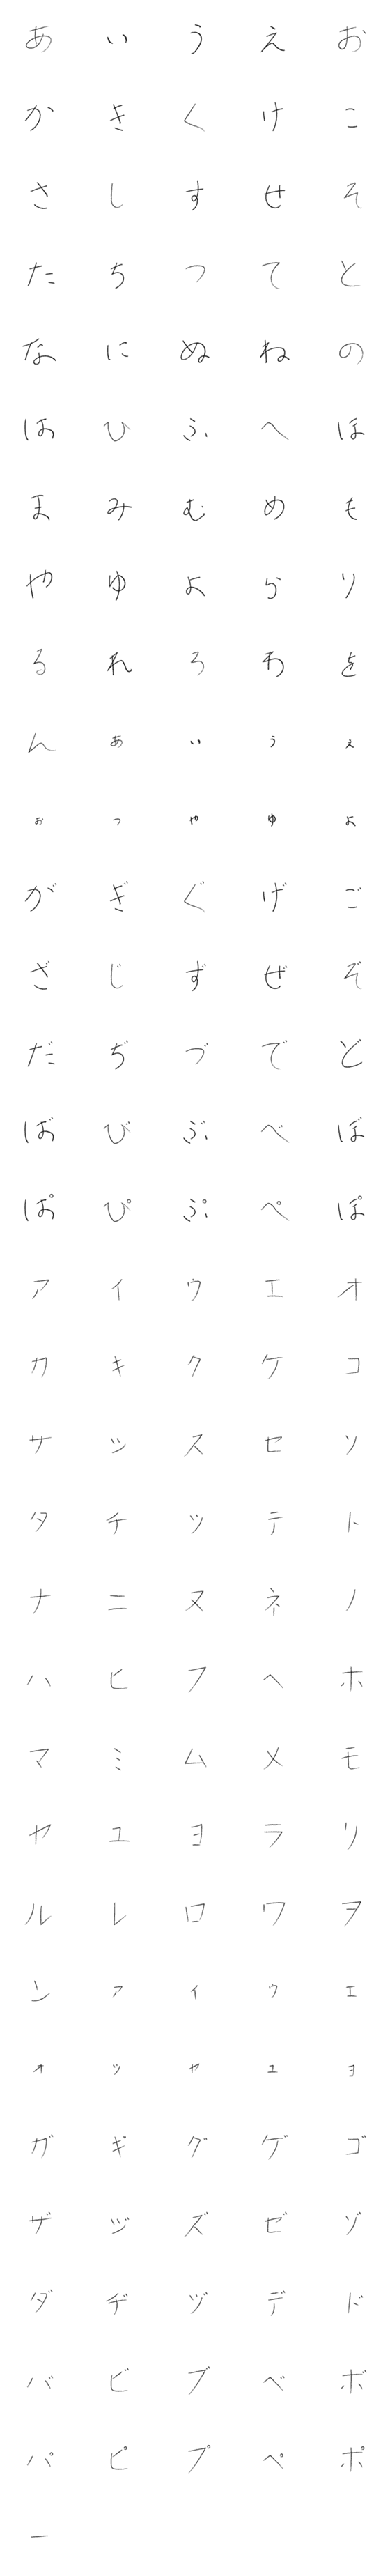 [LINE絵文字]男の子の手描き文字【フォント】の画像一覧